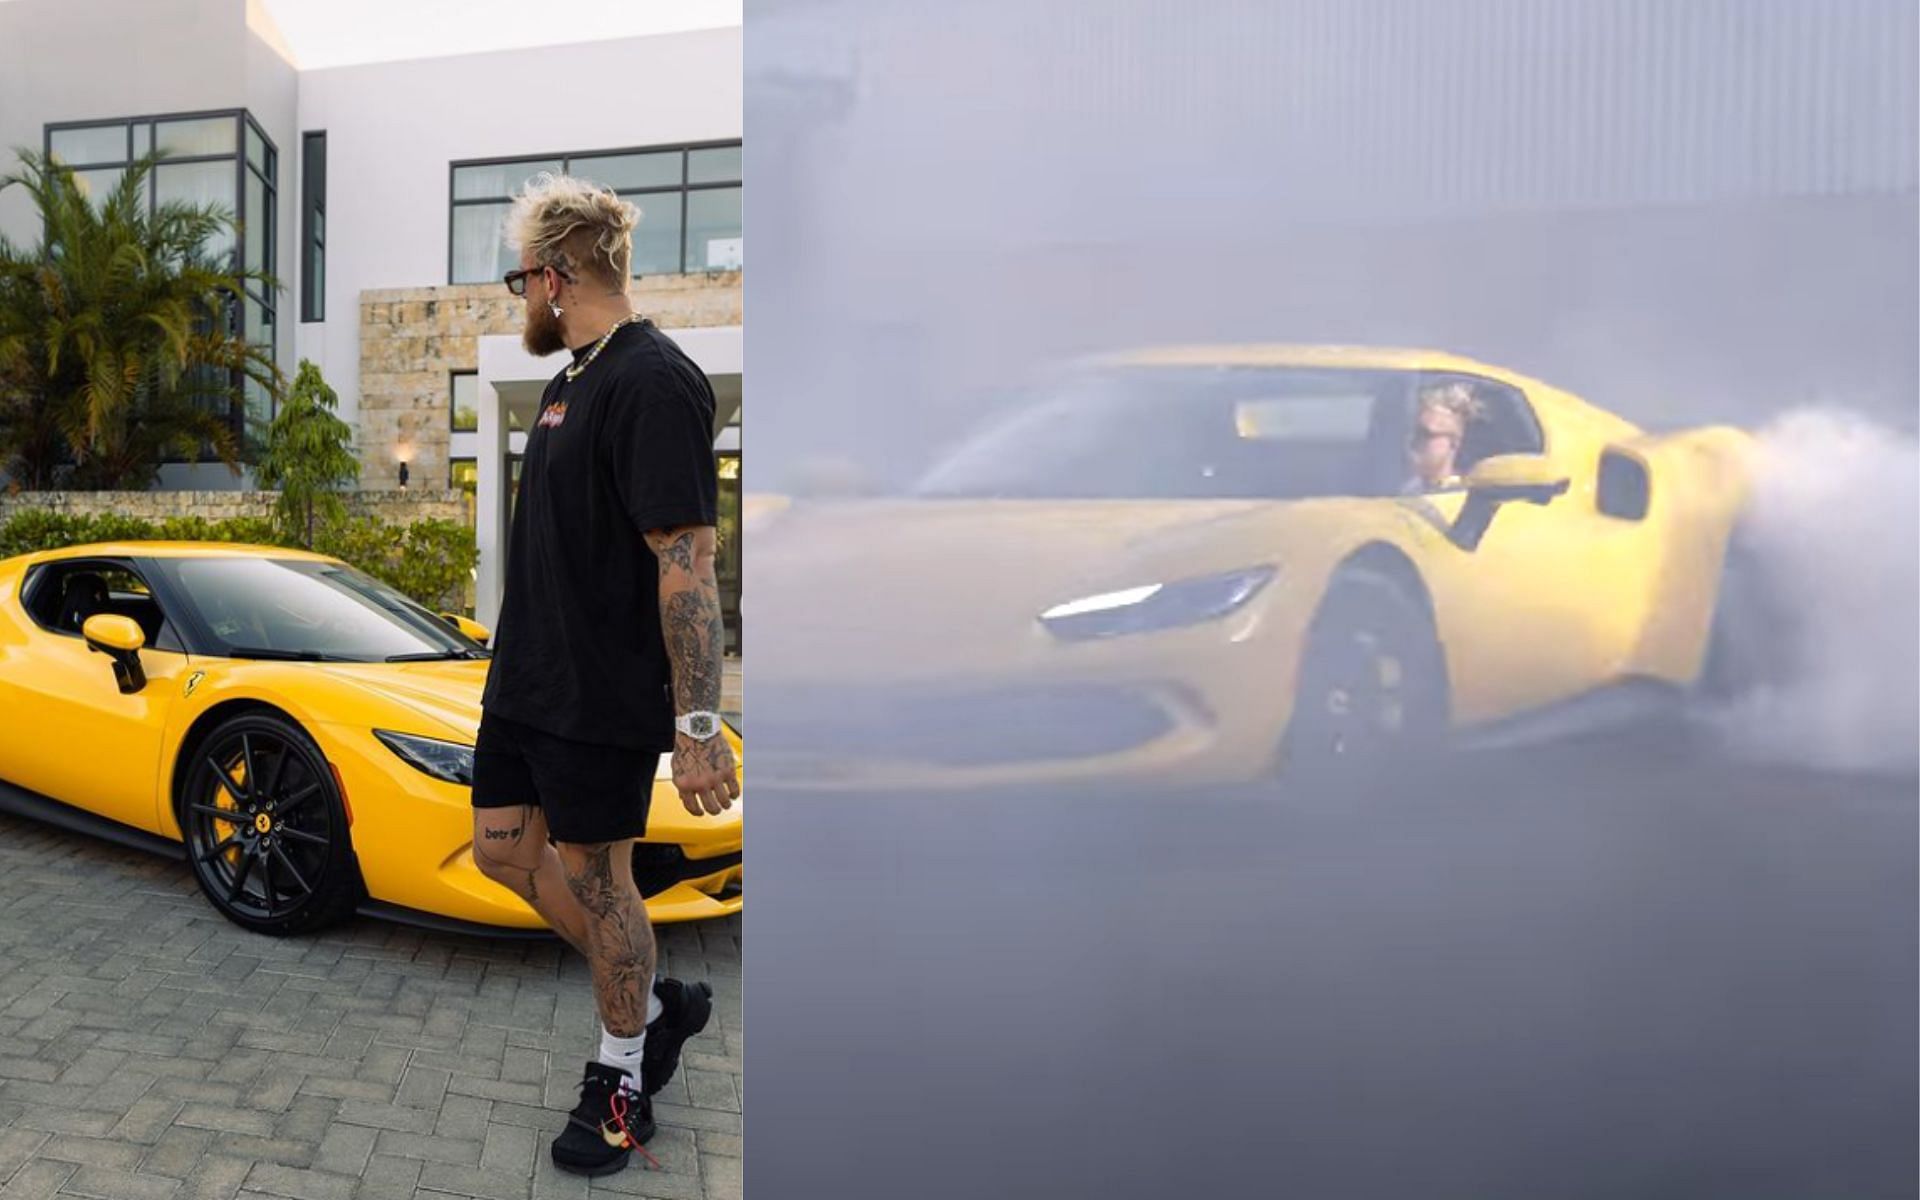 Jake Paul with his Ferrari 296 GTB (left) and Jake Paul doing donuts in his new Ferrari (right) (Image credits @jakepaul on Instagram and @Jake Paul on YouTube))